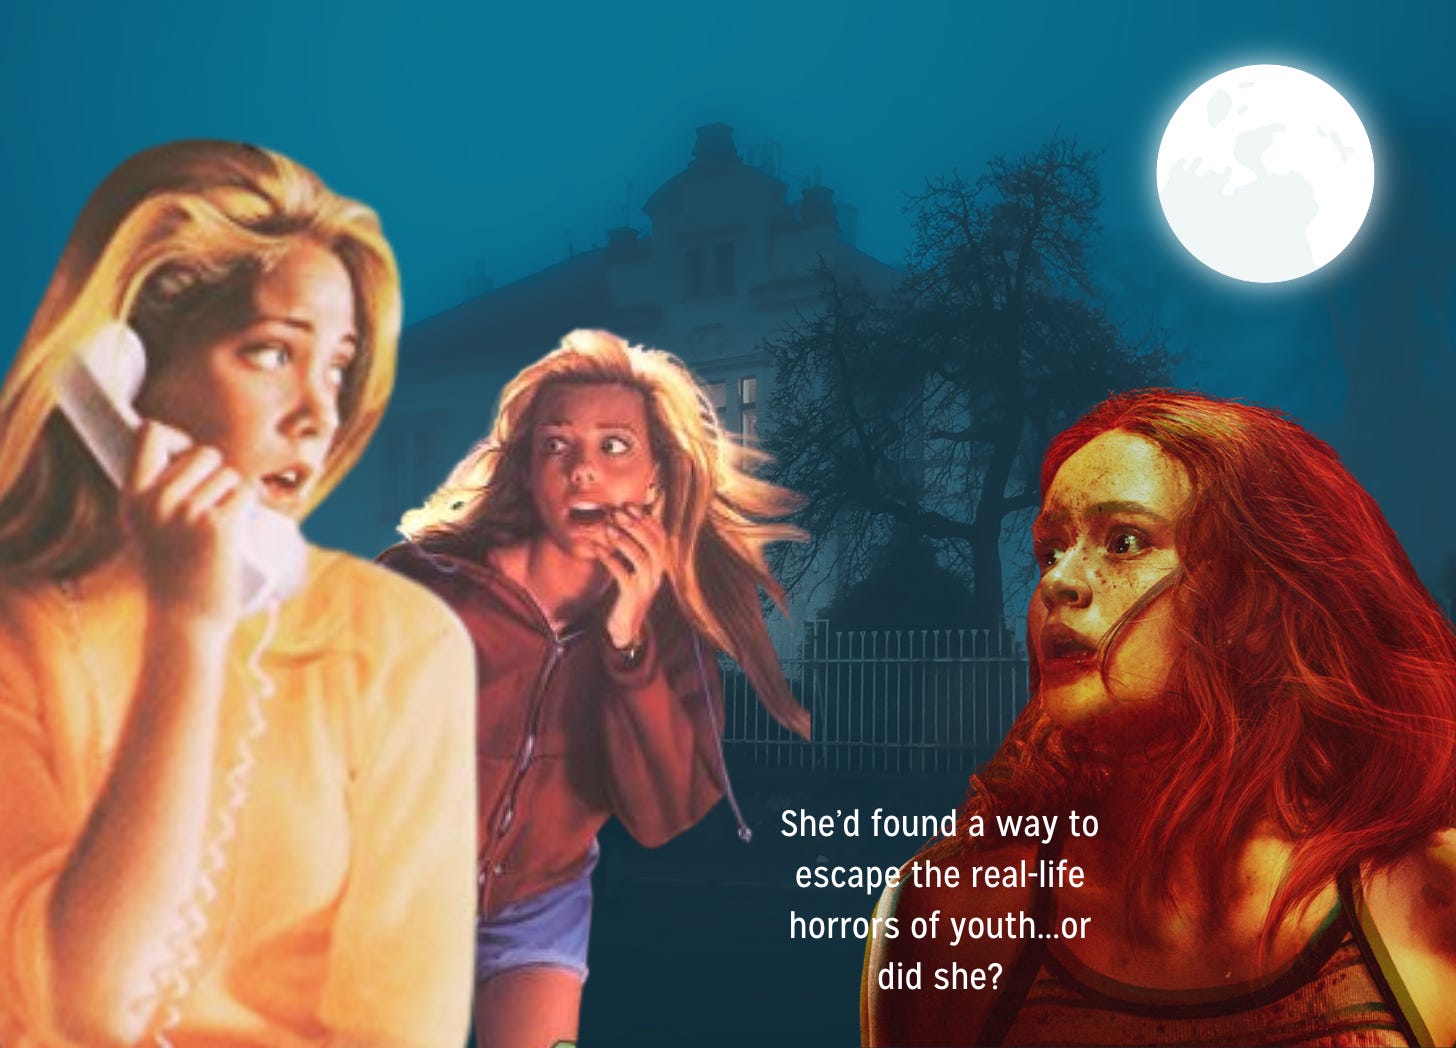 A spooky house in the background of three cutout women, from Fear Street books and the new movie, all with their mouths agape in horror. White text in the bottom right reads "She'd found a way to escape the real-life horrors of youth... or did she?"